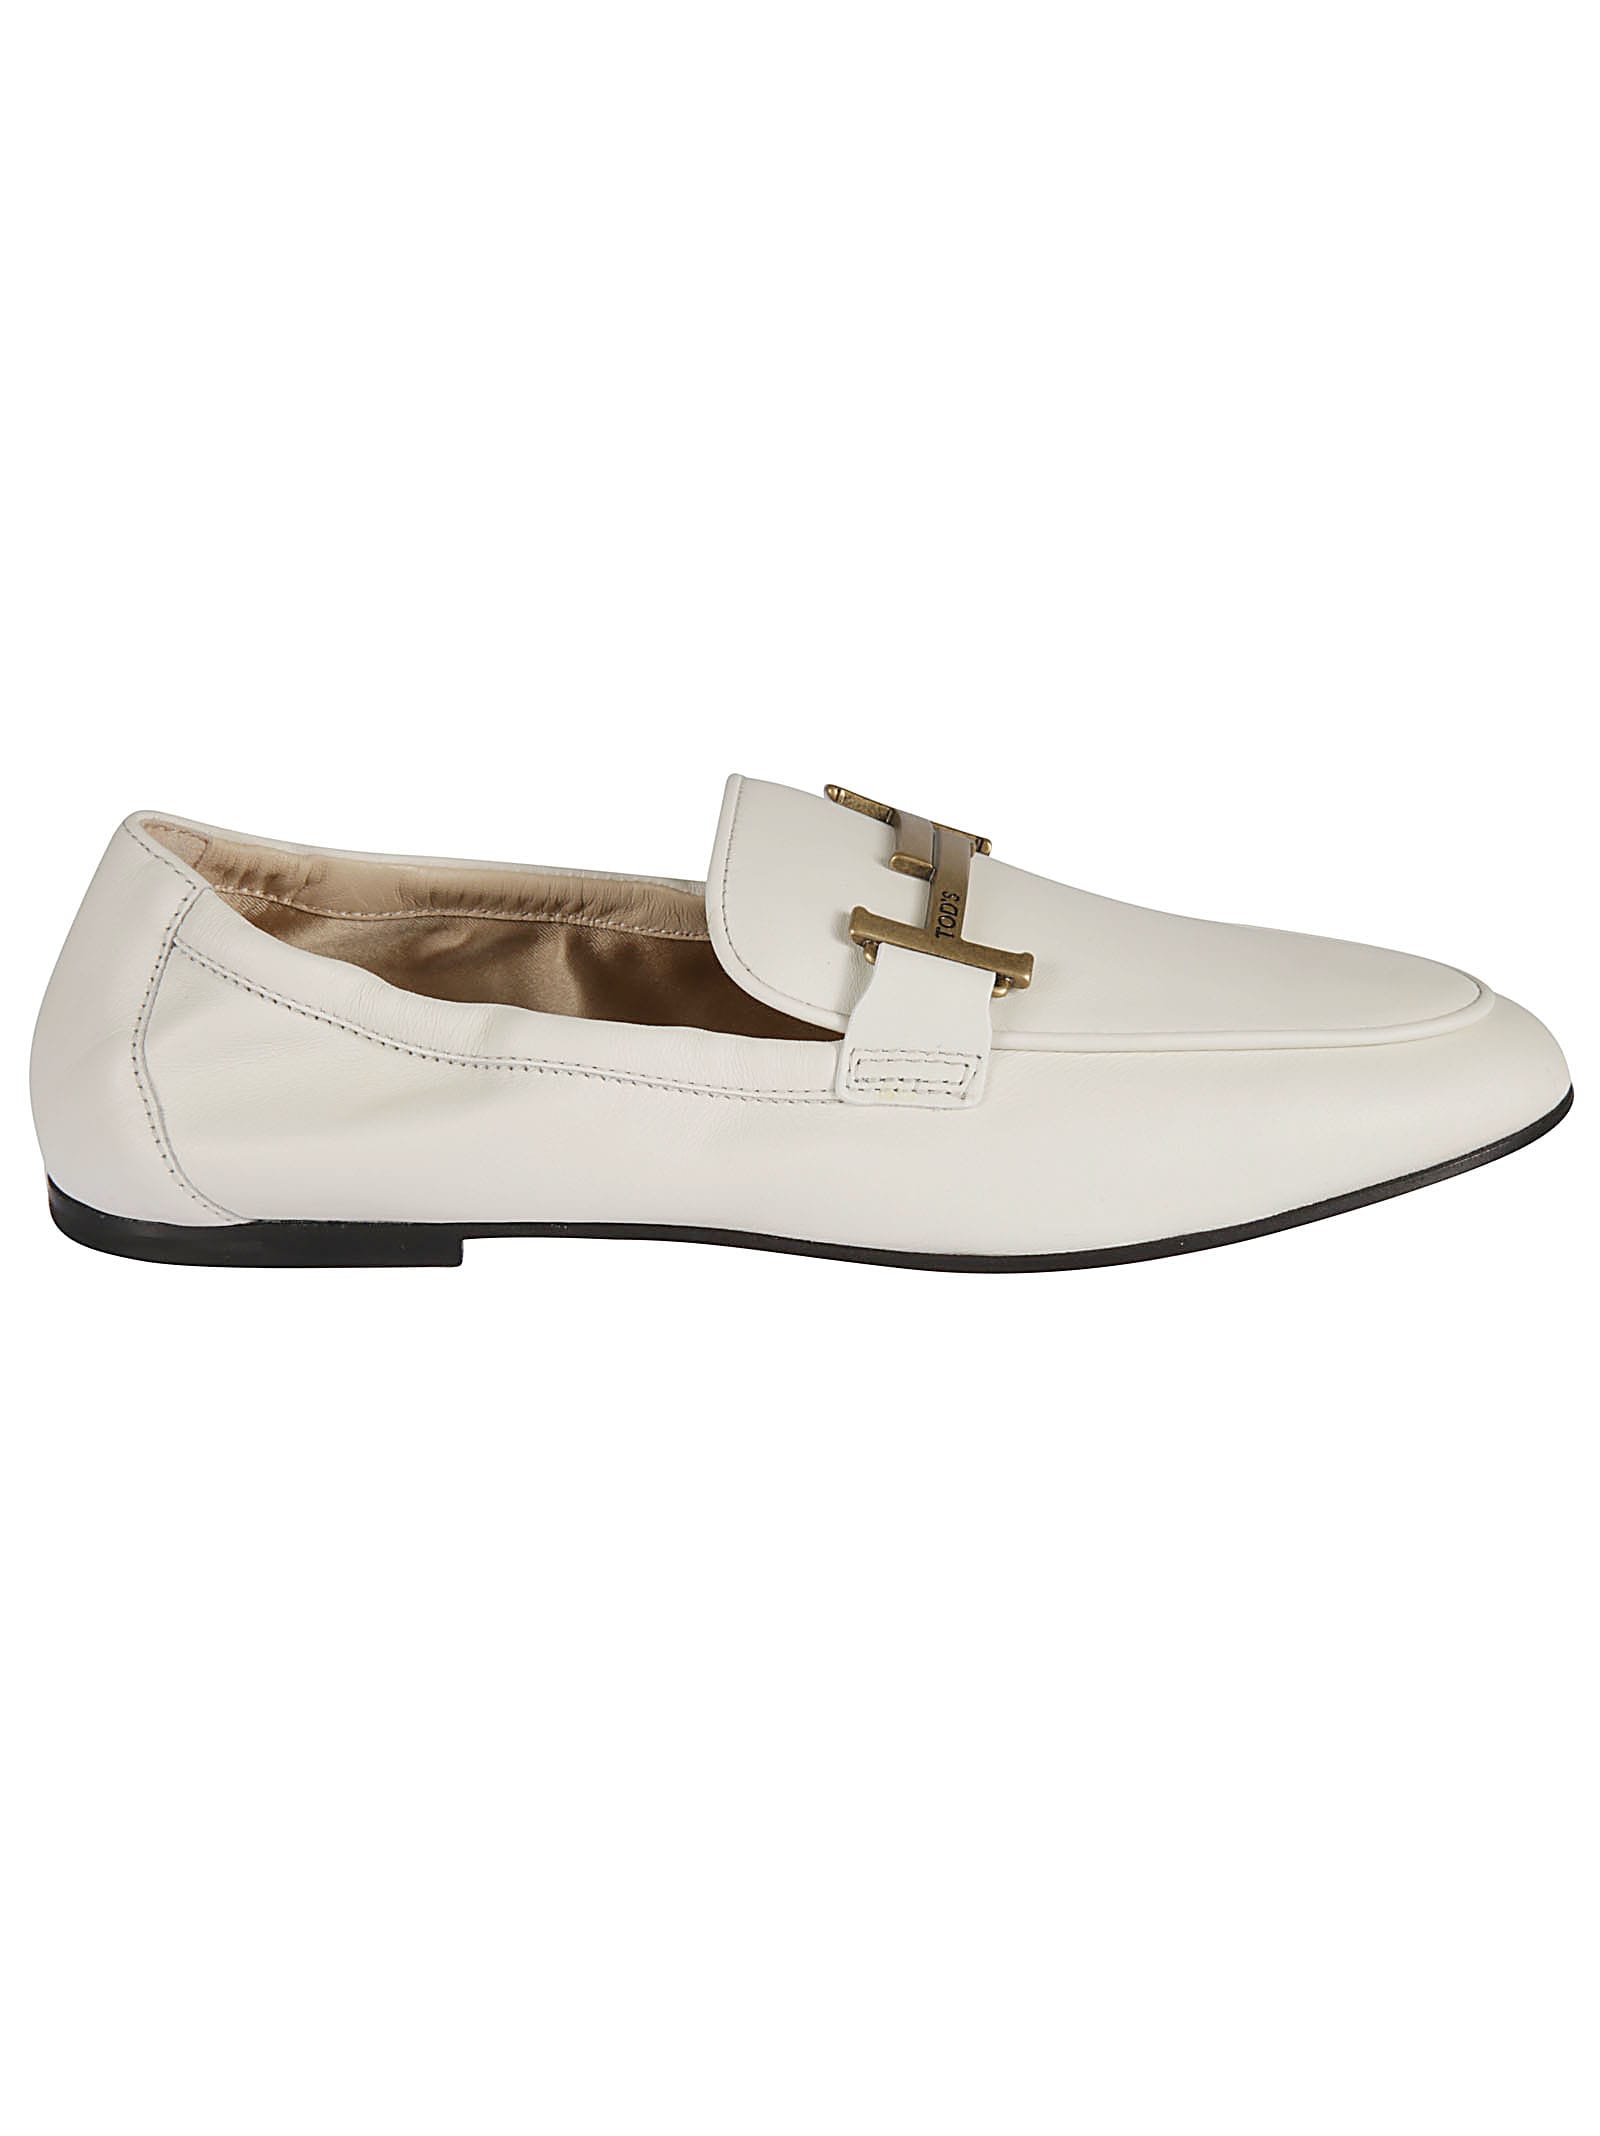 Buy Tods 79a Loafers online, shop Tods shoes with free shipping